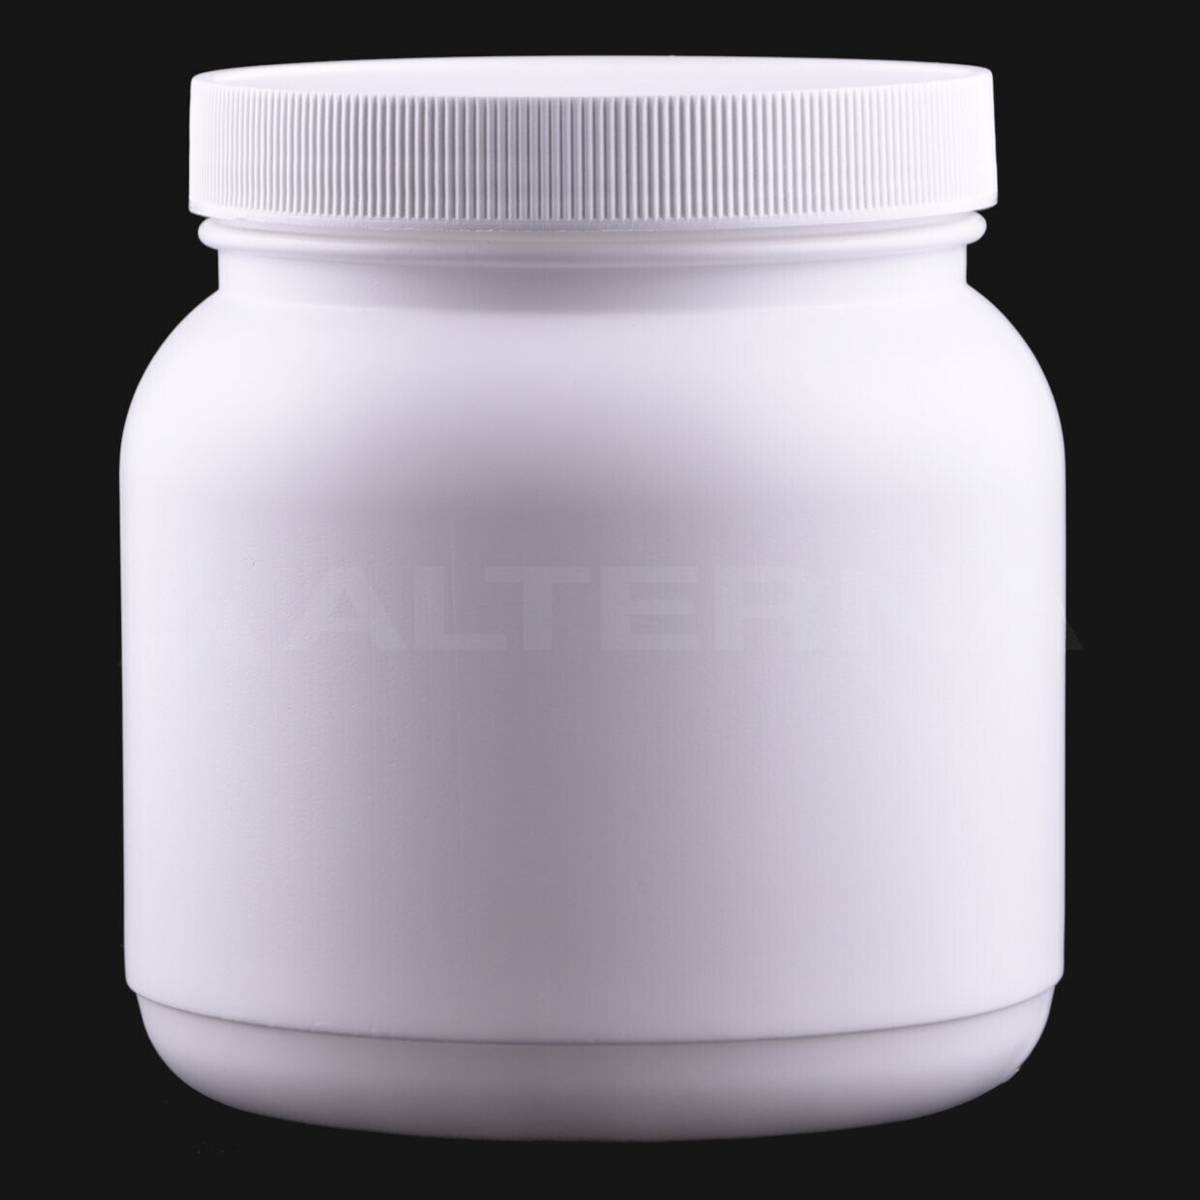 GENERIC White Protein Jar Container, Weight: 320 Grams, Size: 3 KG